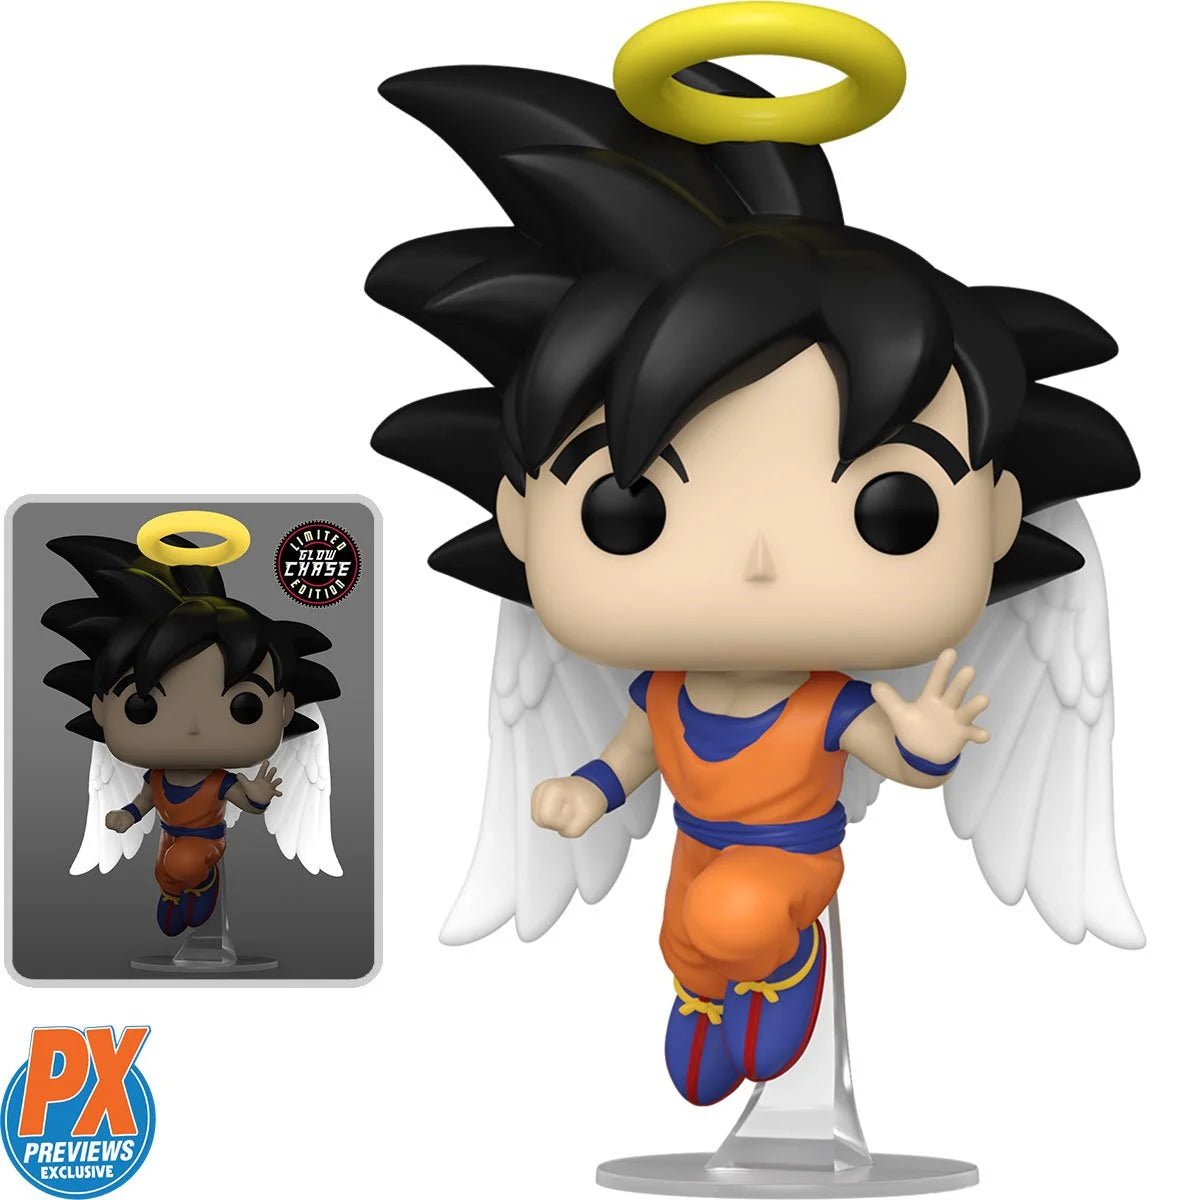 Dragon Ball Z Goku with Wings Funko Pop! Vinyl Figure #1430 - Previews Exclusive with chase - heretoserveyou